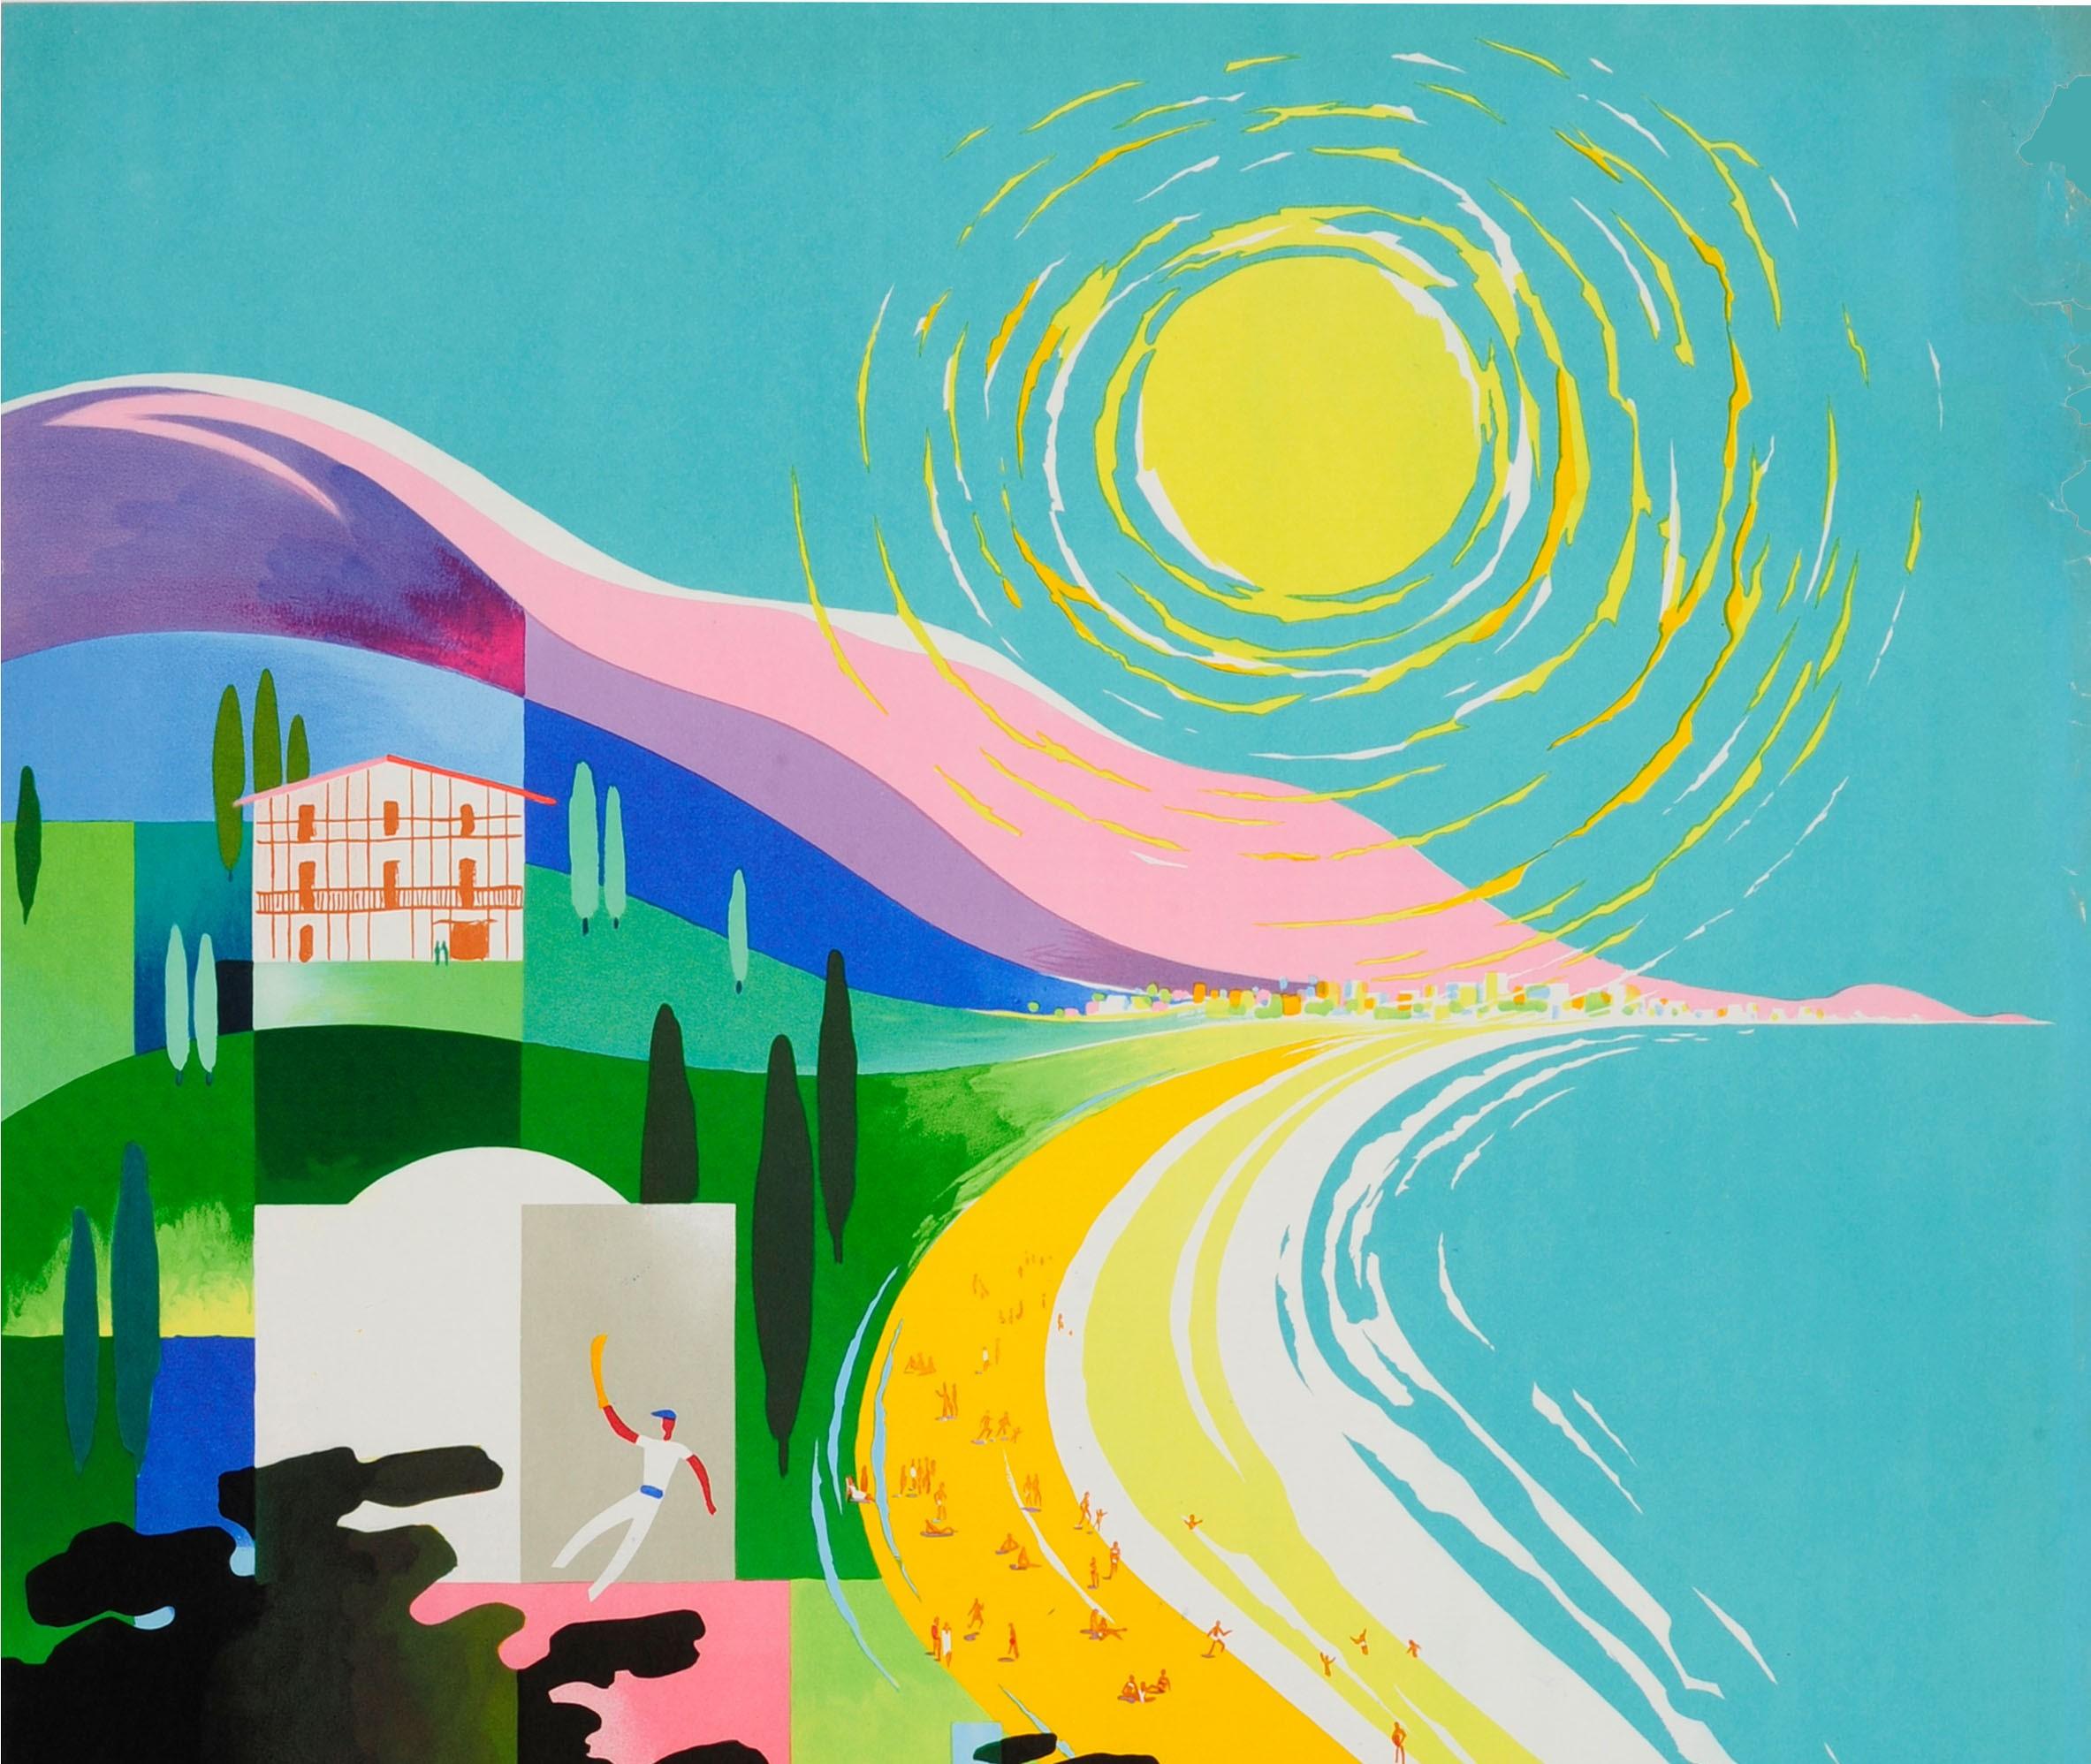 Original vintage travel advertising poster issued by French Railways SNCF to promote its services to the south of France - Go by train to the Basque Coast - featuring a colourful design by Jean Jacquelin (1905-1989) depicting a stylised view over